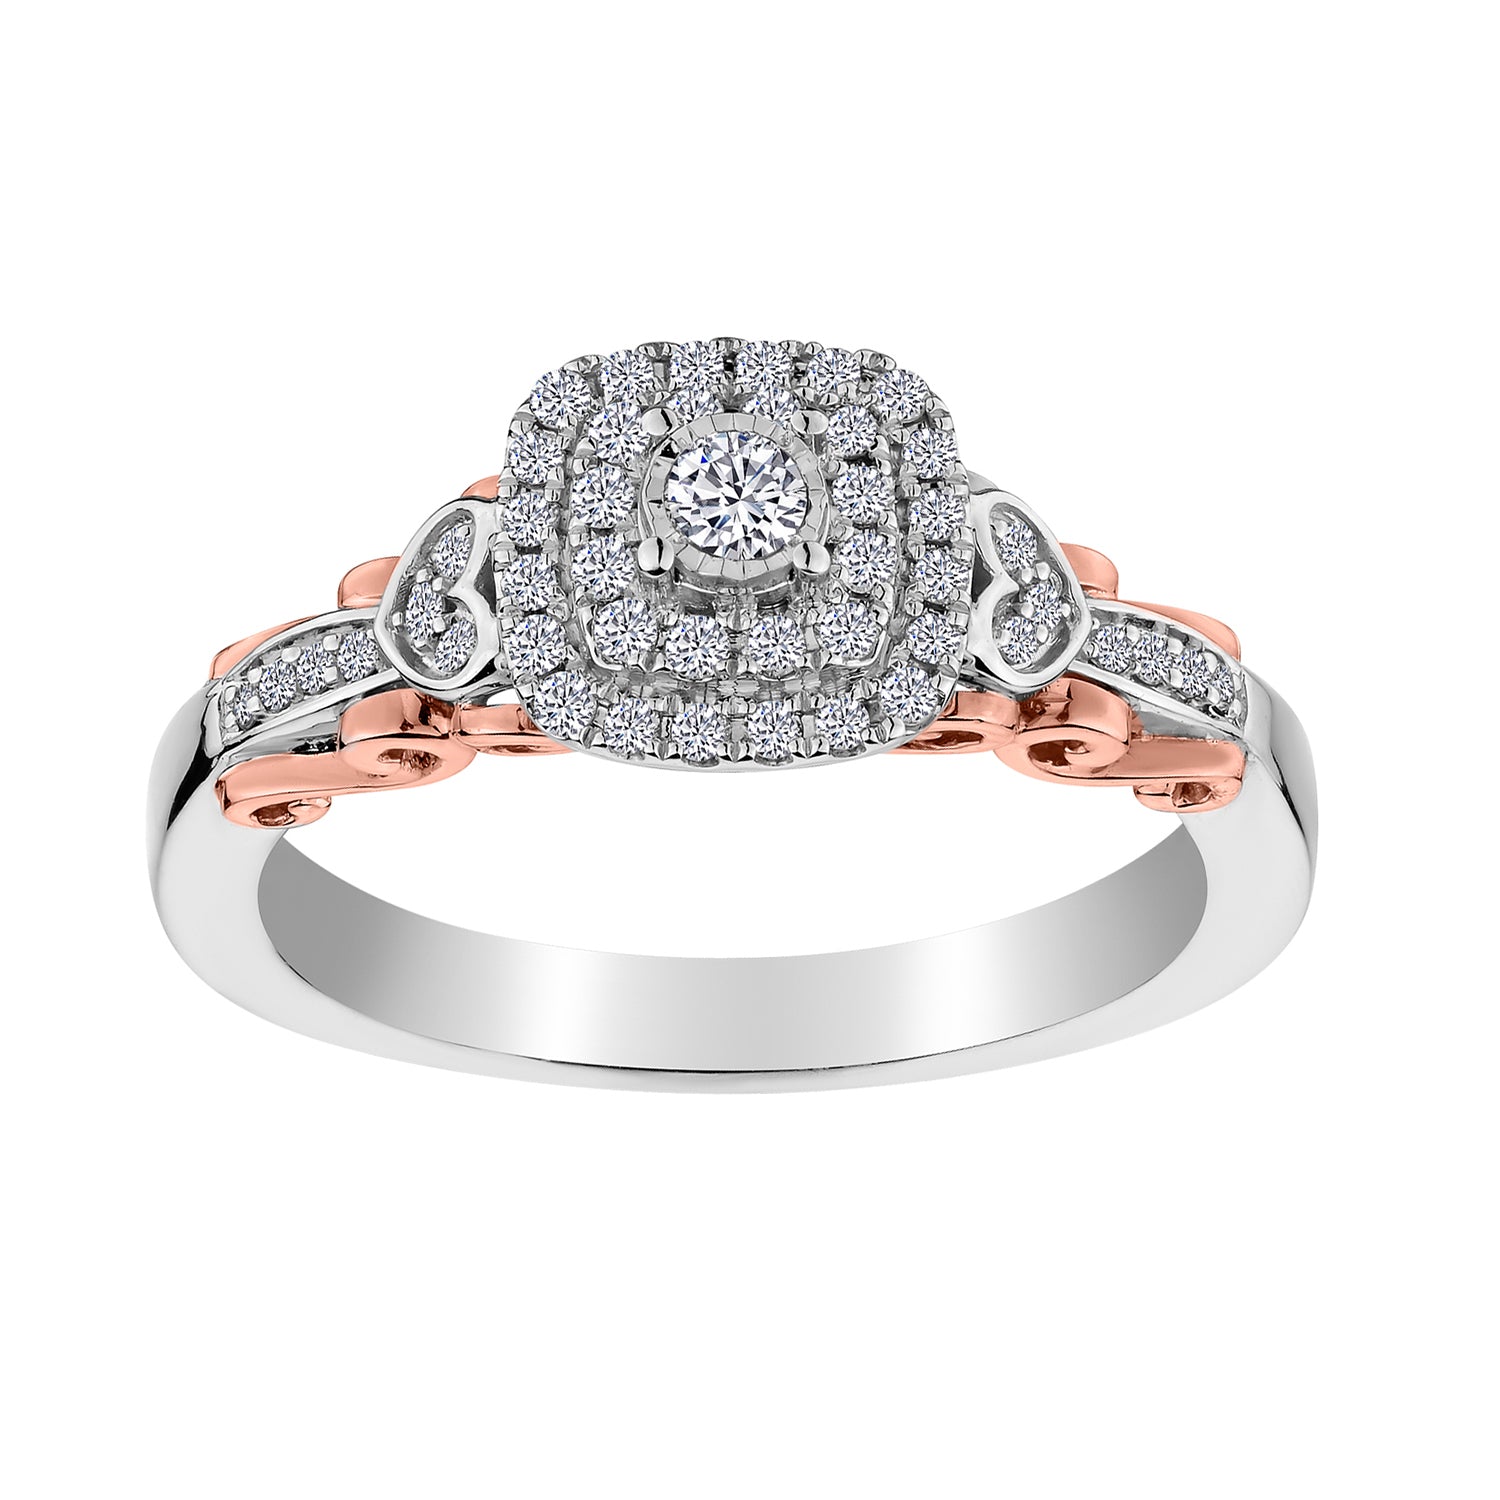 .33 Carat Diamond Pave Ring,  10kt White & Rose Gold (Two Tone). Griffin Jewellery Designs